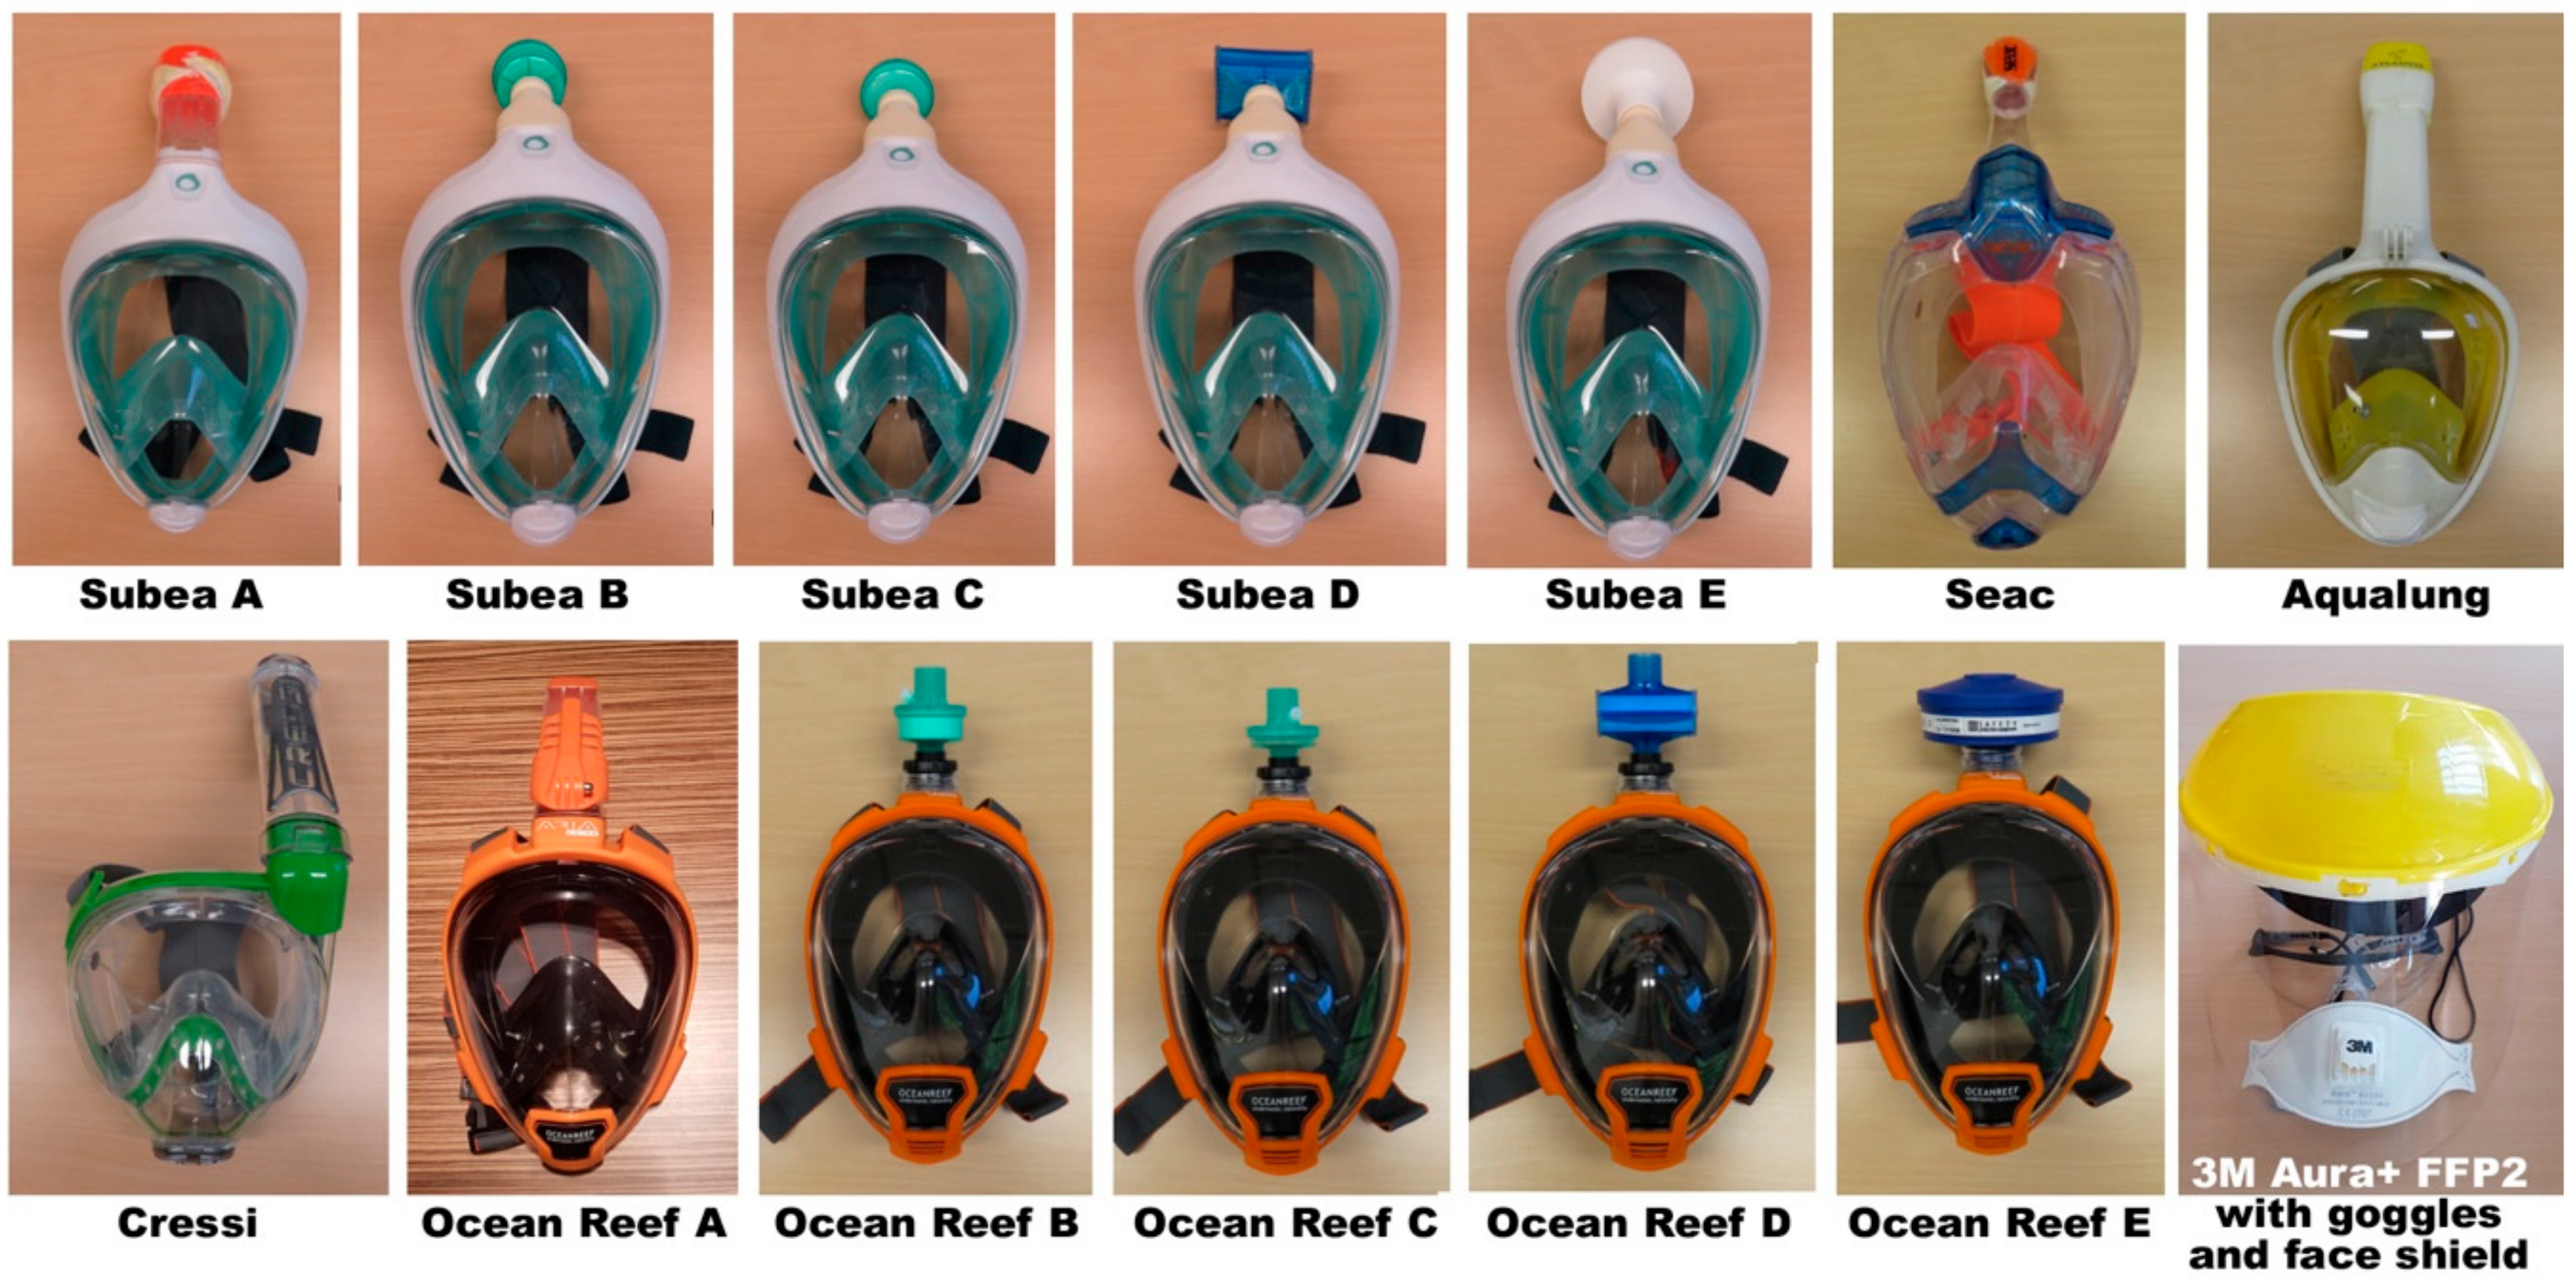 IJERPH | Free Full-Text | Evaluation of Protection Level, Respiratory  Safety, and Practical Aspects of Commercially Available Snorkel Masks as  Personal Protection Devices Against Aerosolized Contaminants and SARS-CoV2